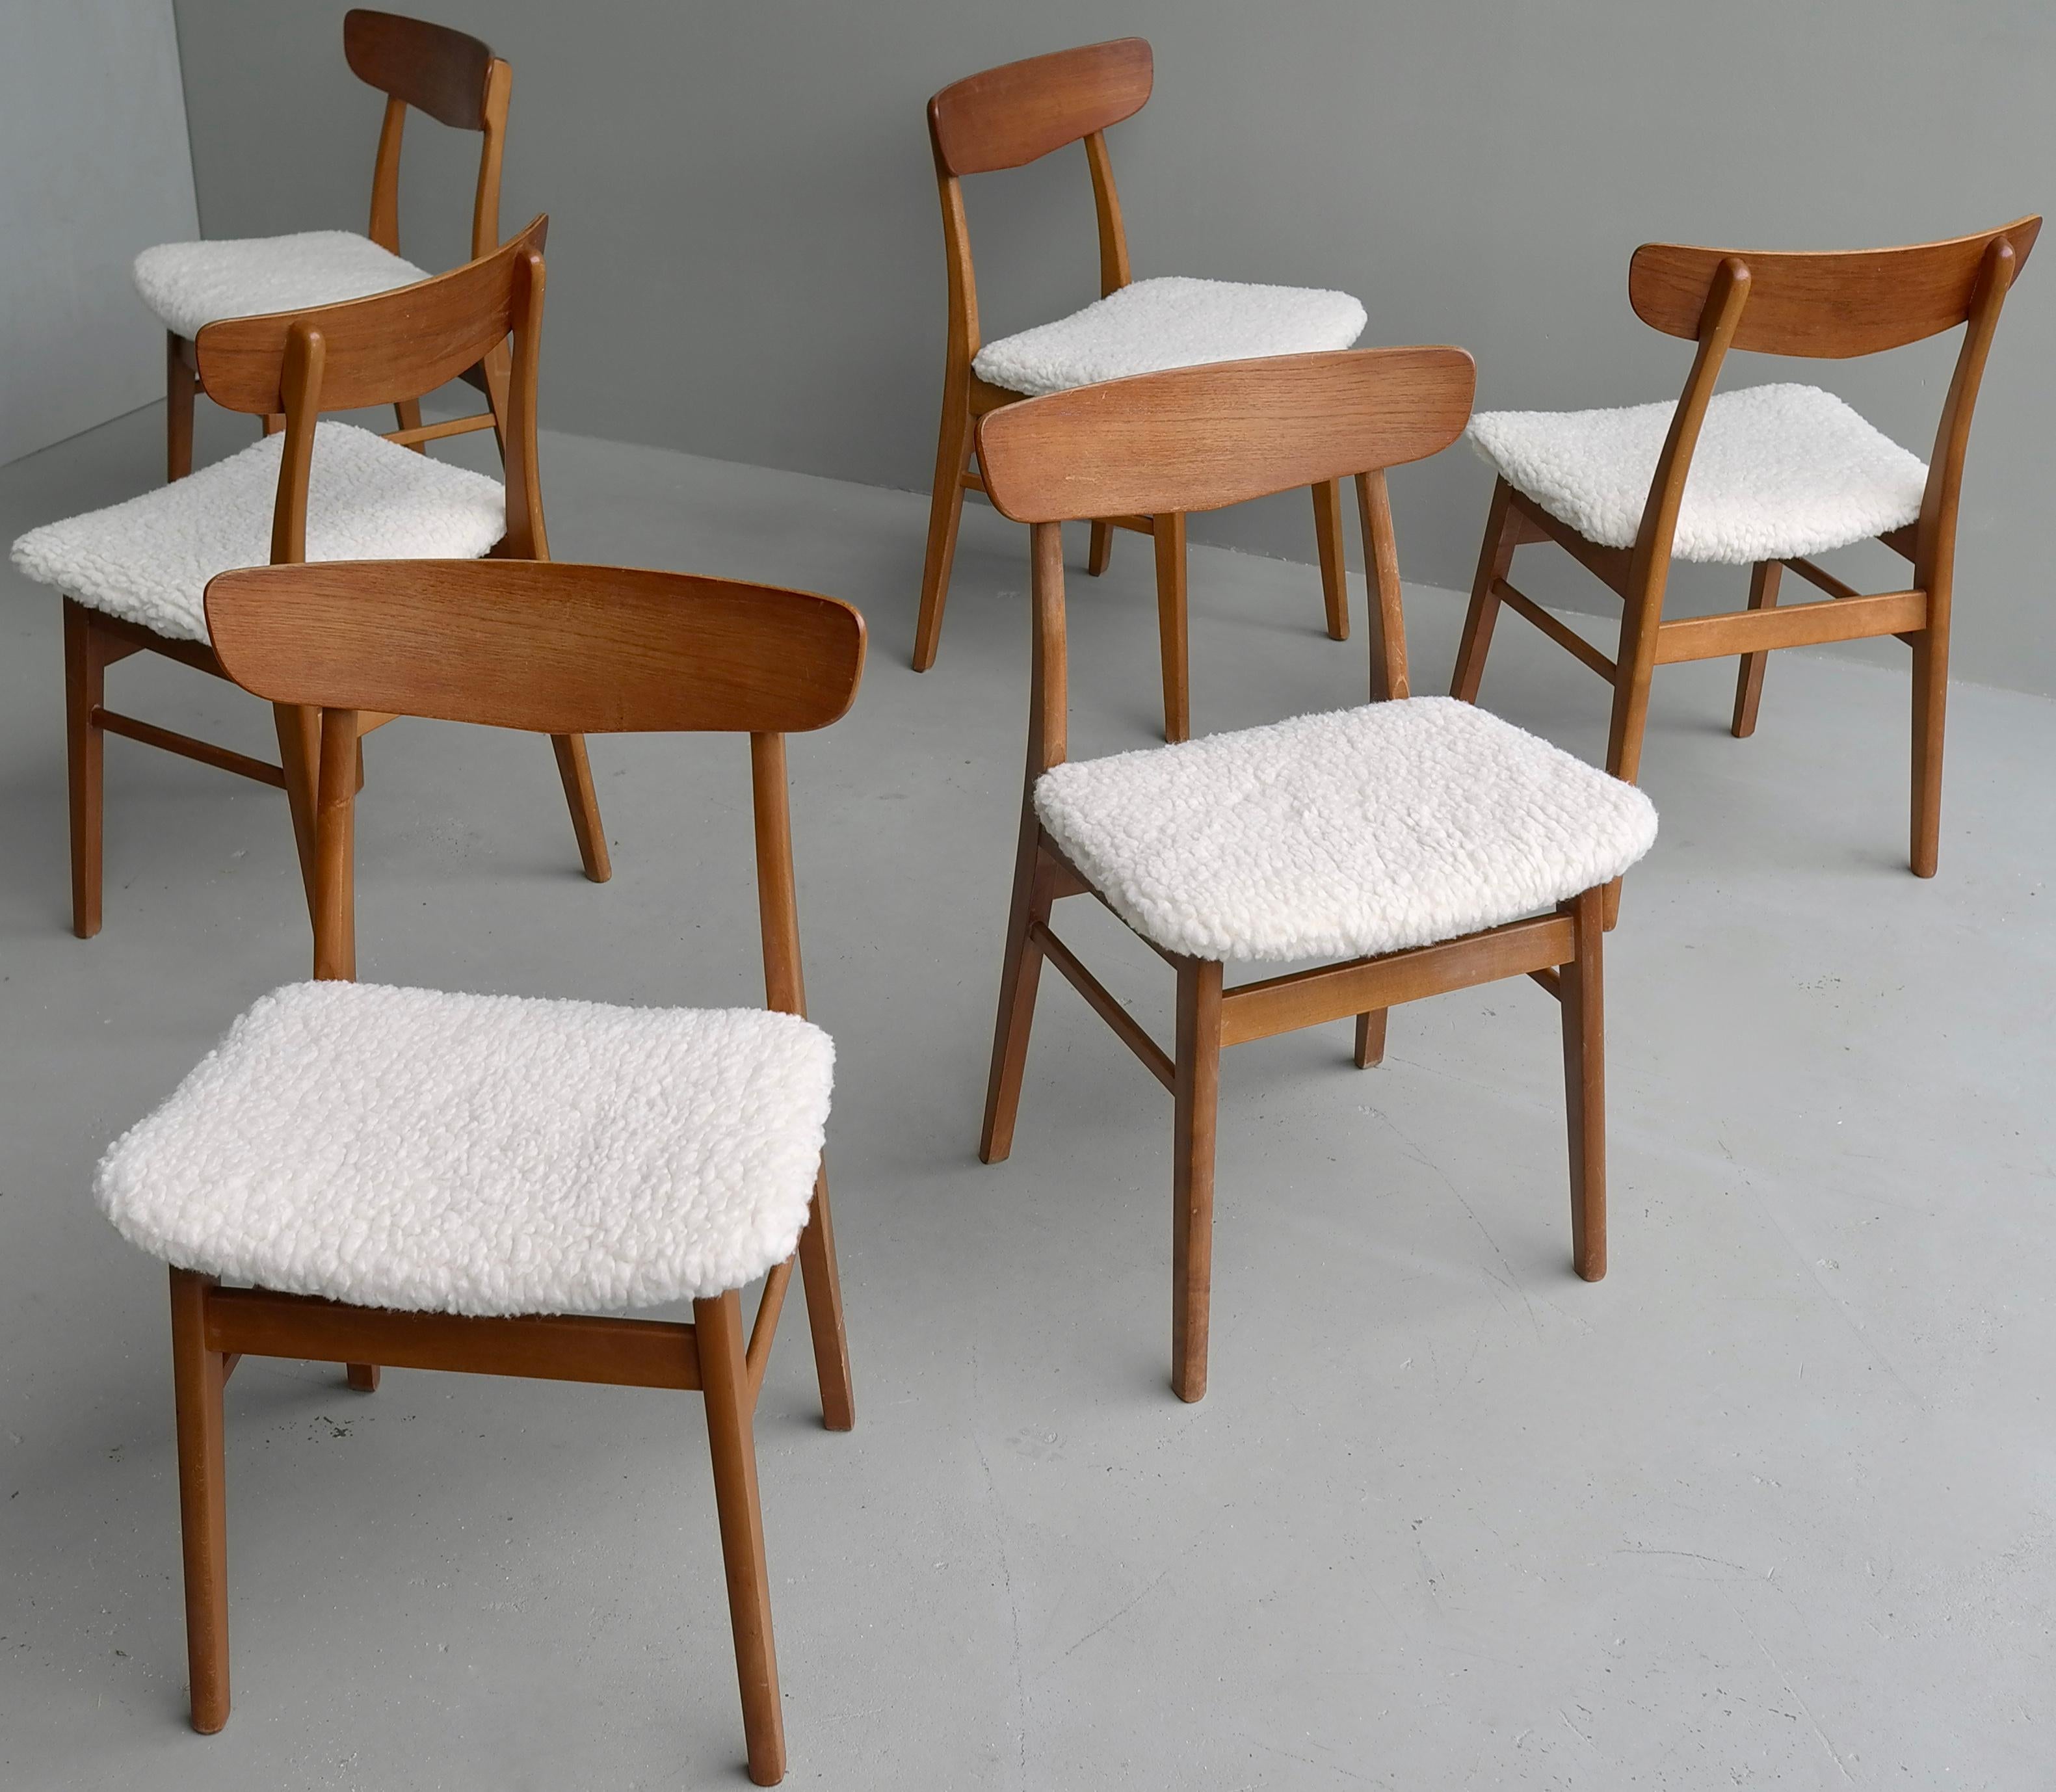 Six Teak Danish Heart Chairs with Seats in Pure Merino Wool, by Farstrup Møbler 13